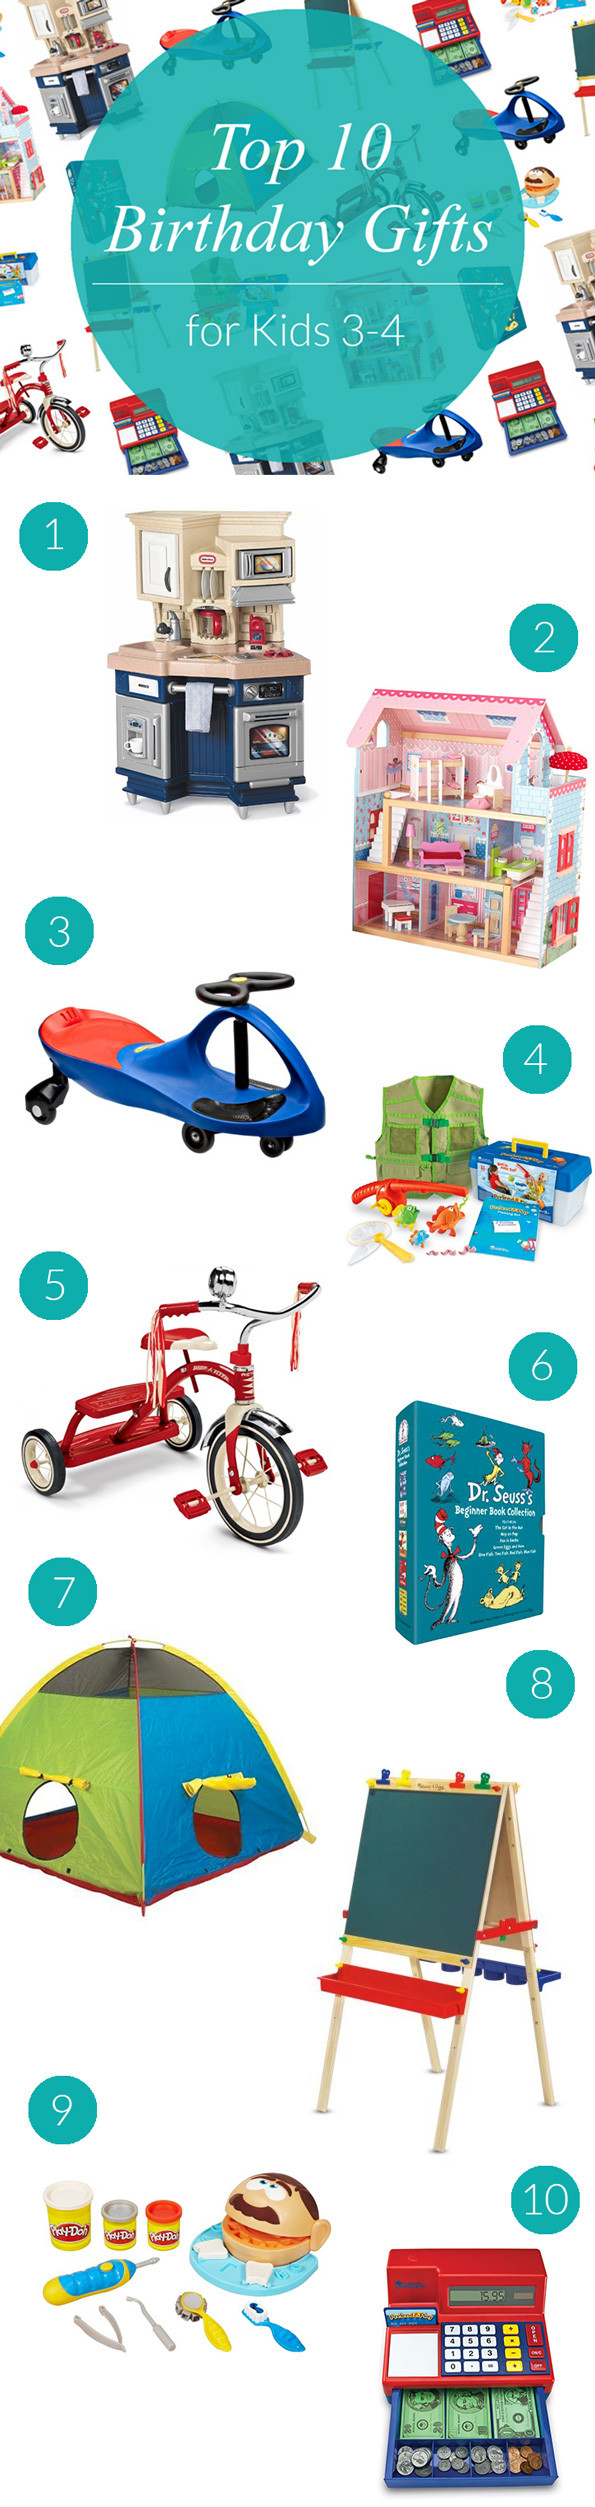 Gifts For Kids By Age
 Top 10 Birthday Gifts for Kids Ages 3 4 Evite